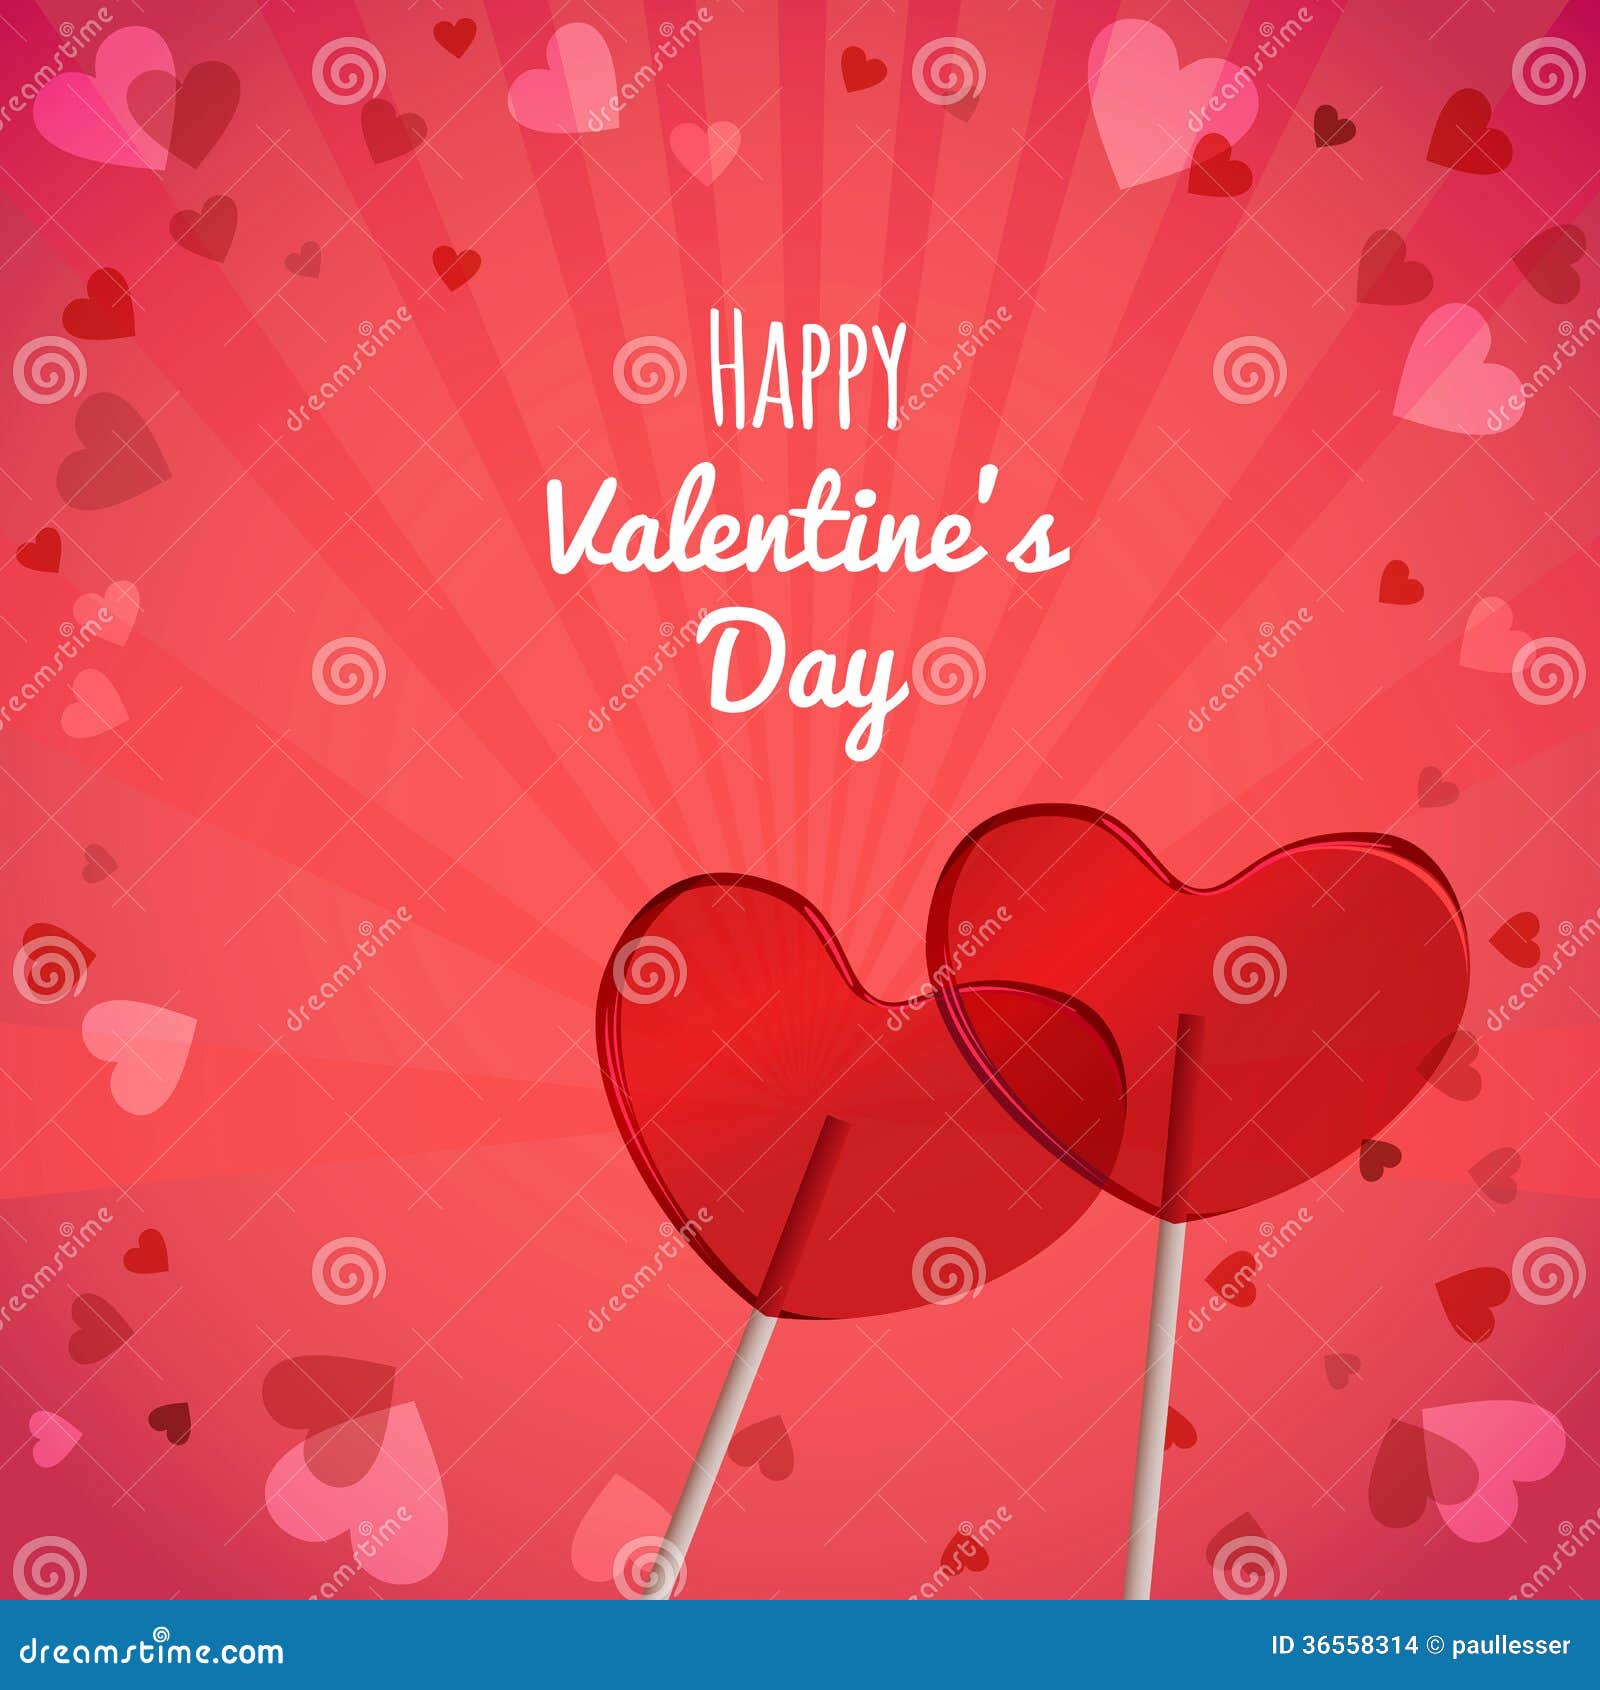 Lollipops Heart Shaped Valentines Day Stock Images - Image: 36558314